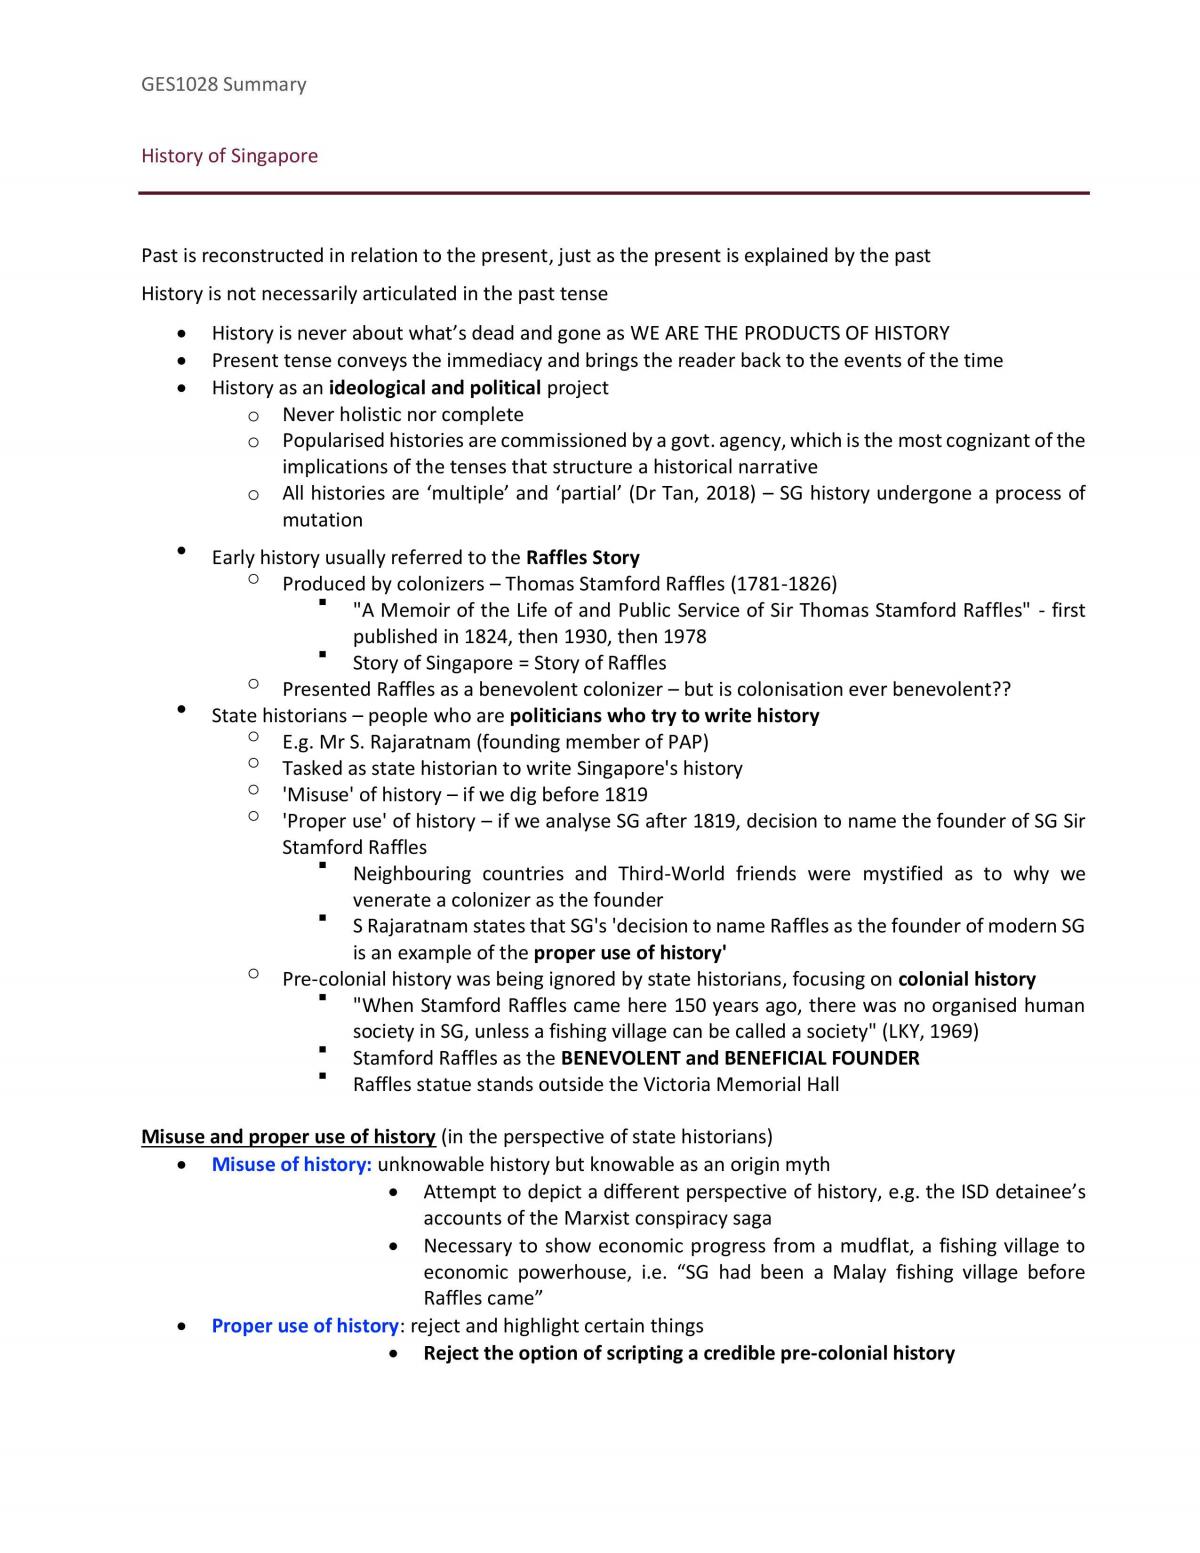 GES1028 Full set of notes - Page 1